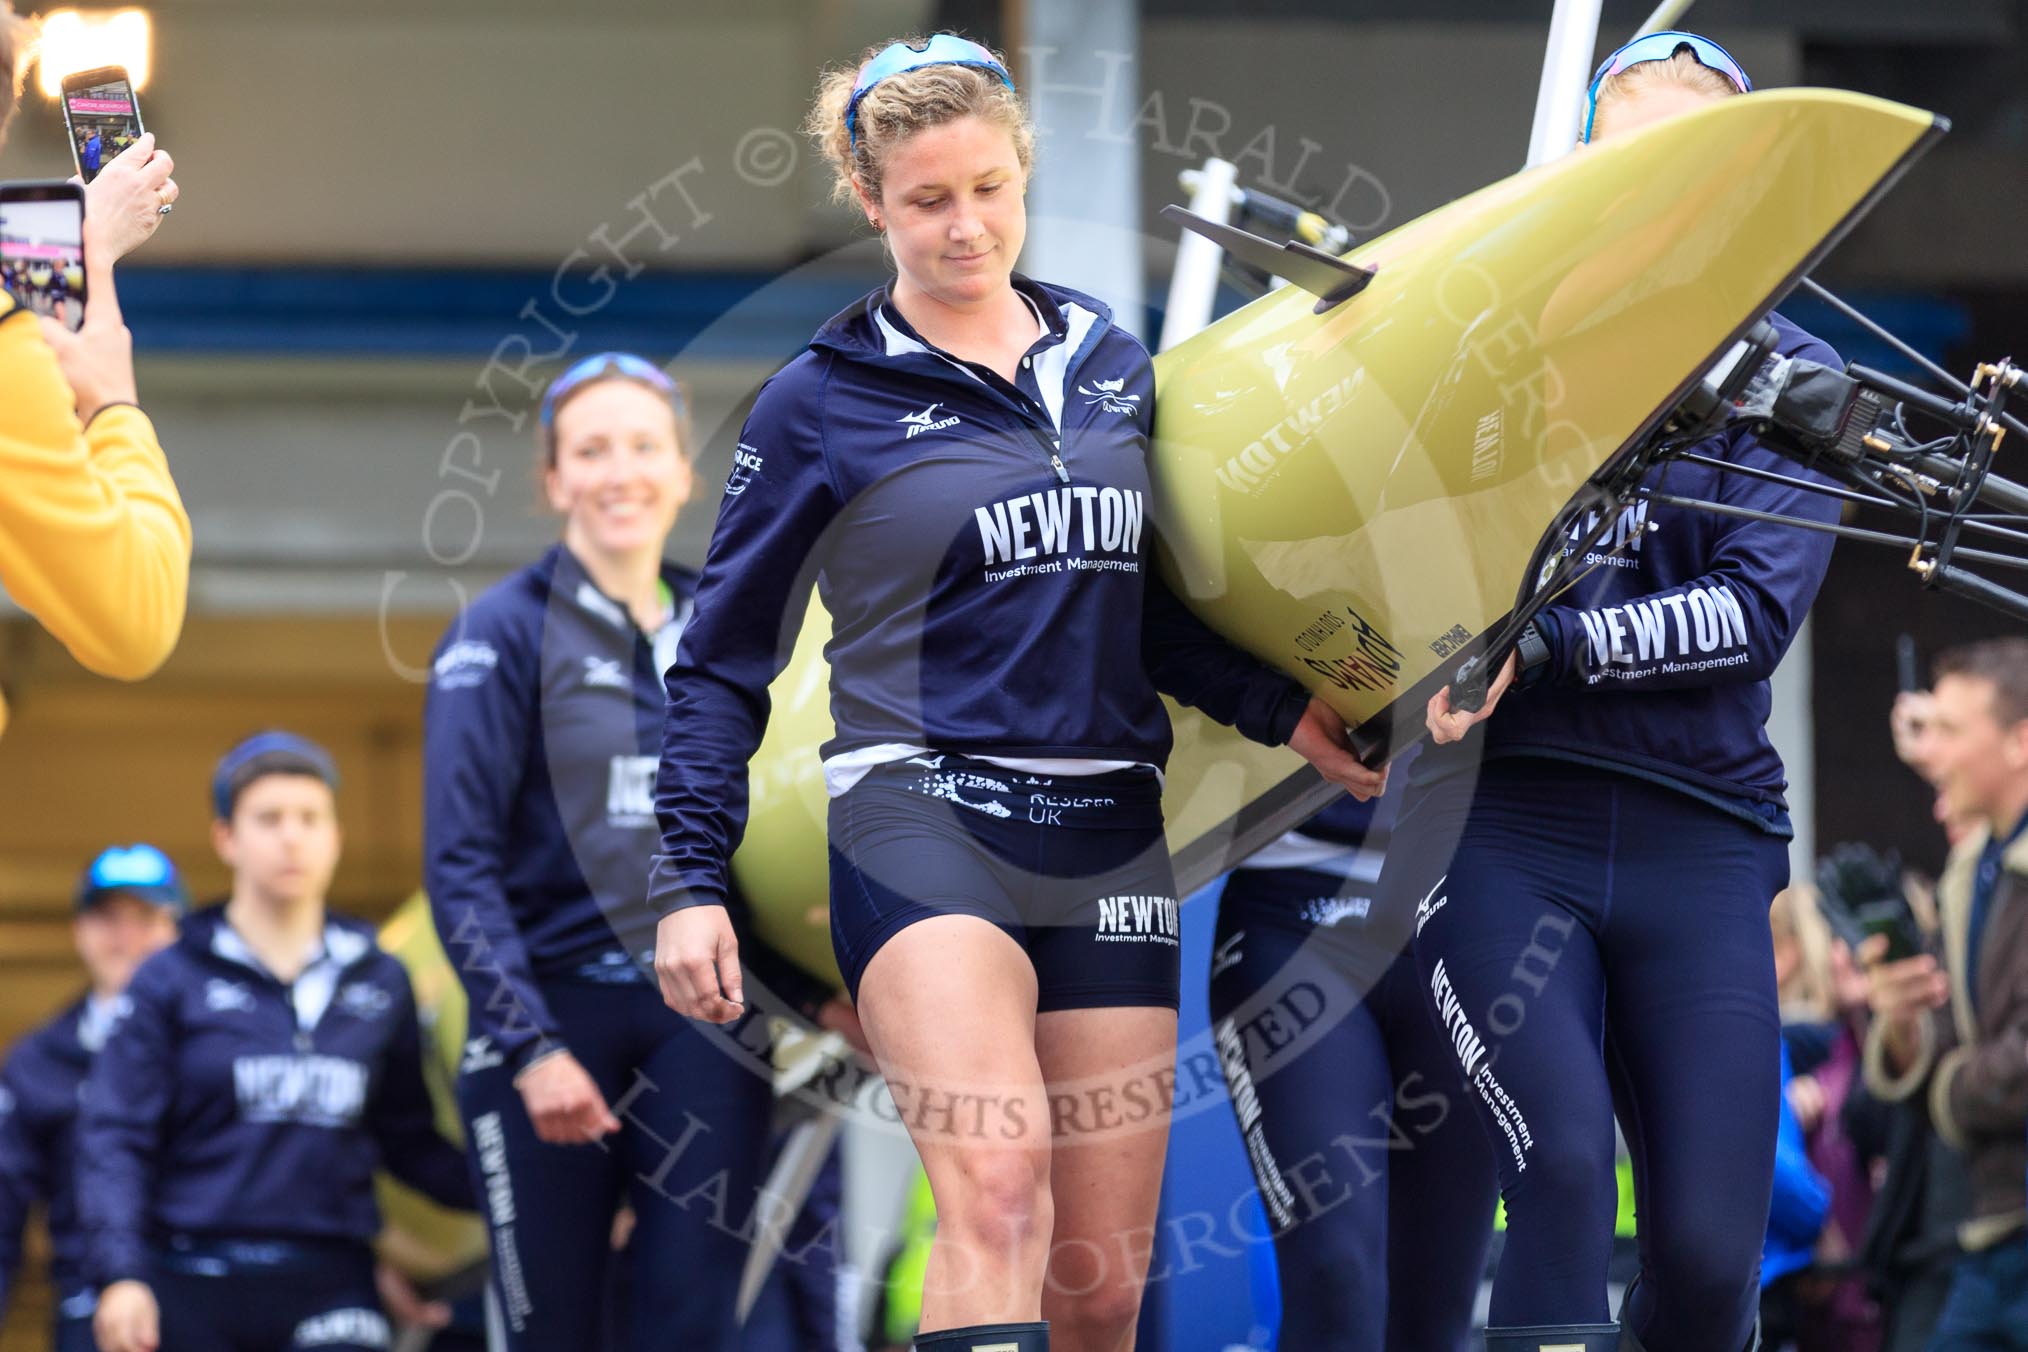 The Cancer Research UK Women's Boat Race 2018: THe Oxford boat  is carried out of the boathouse. In front 5 seat Morgan McGovern.
River Thames between Putney Bridge and Mortlake,
London SW15,

United Kingdom,
on 24 March 2018 at 15:42, image #91